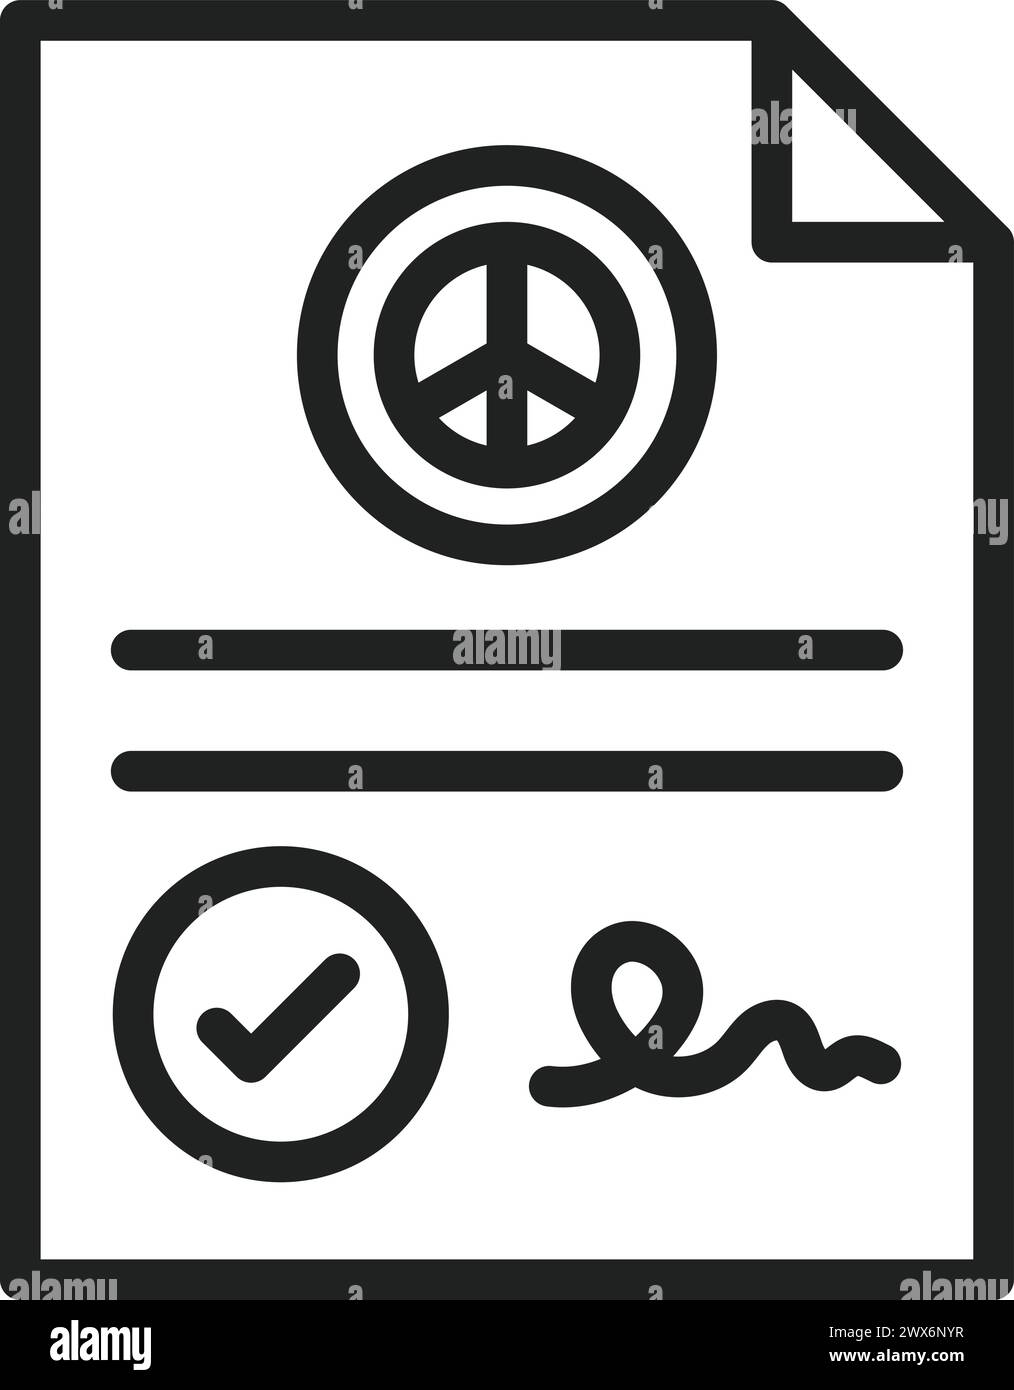 Petition icon vector image. Suitable for mobile application web application and print media. Stock Vector